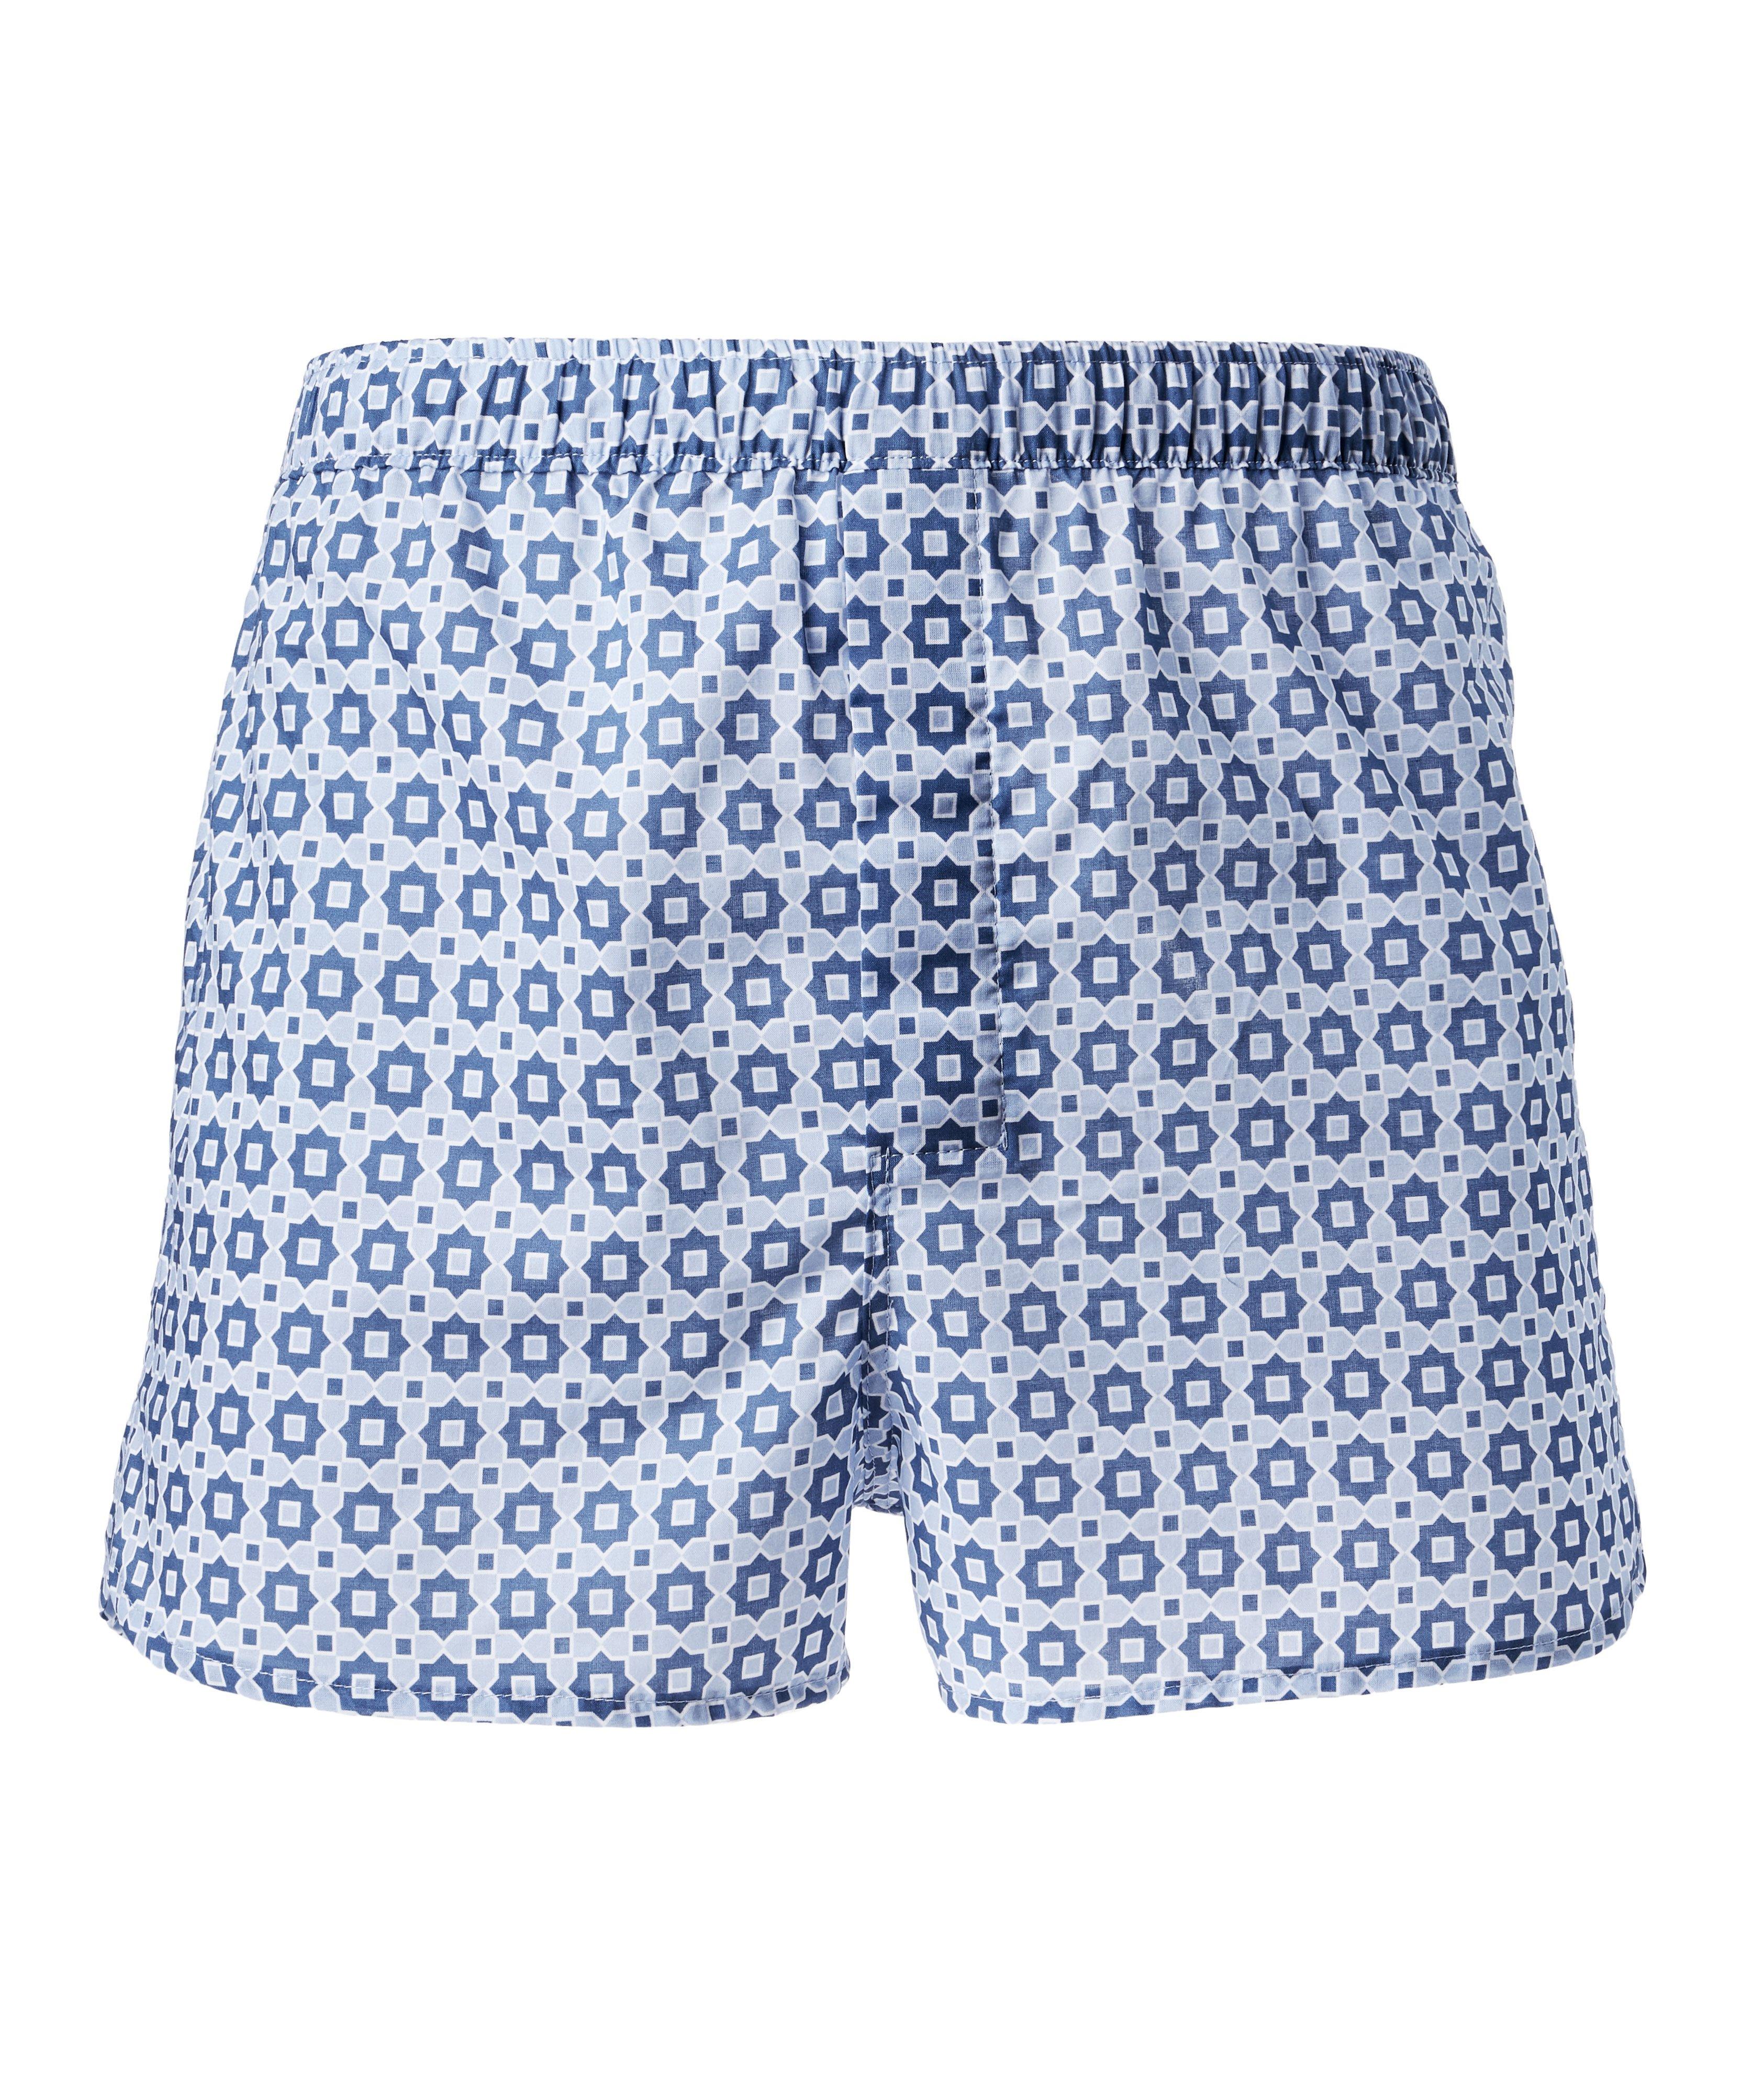 Printed Cotton Boxers image 0